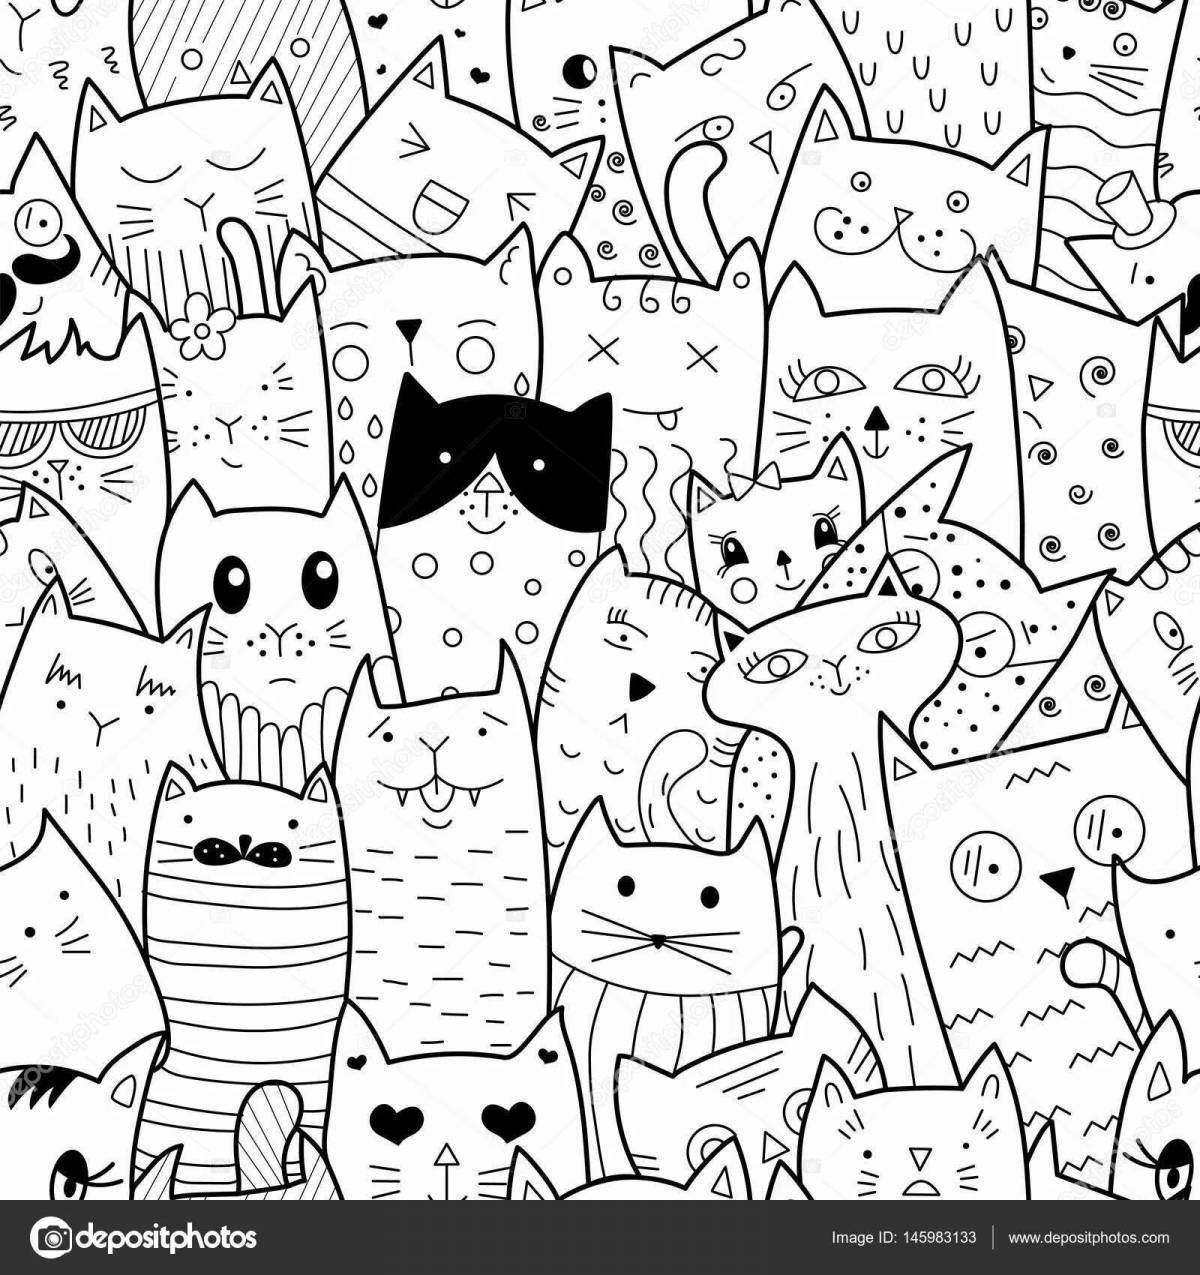 Fancy little cats coloring book